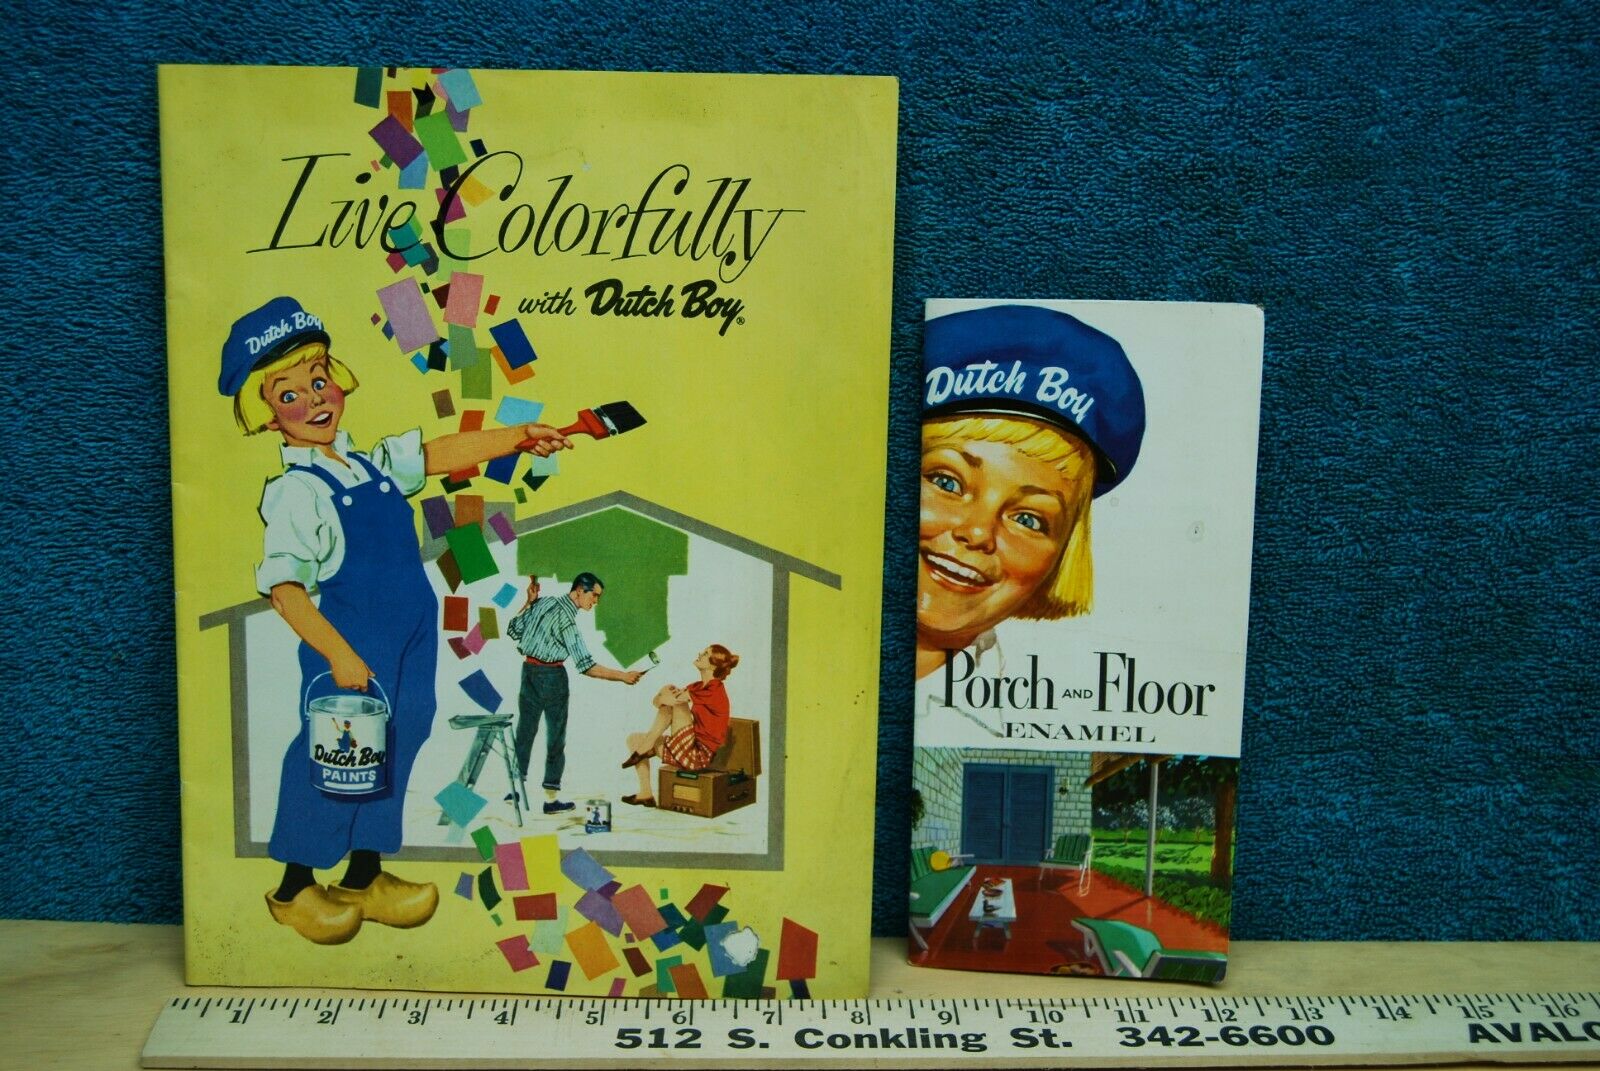 1959 Mid-Century Modern Dutch Boy Paints Live Colorfully Booklet & Paint Samples